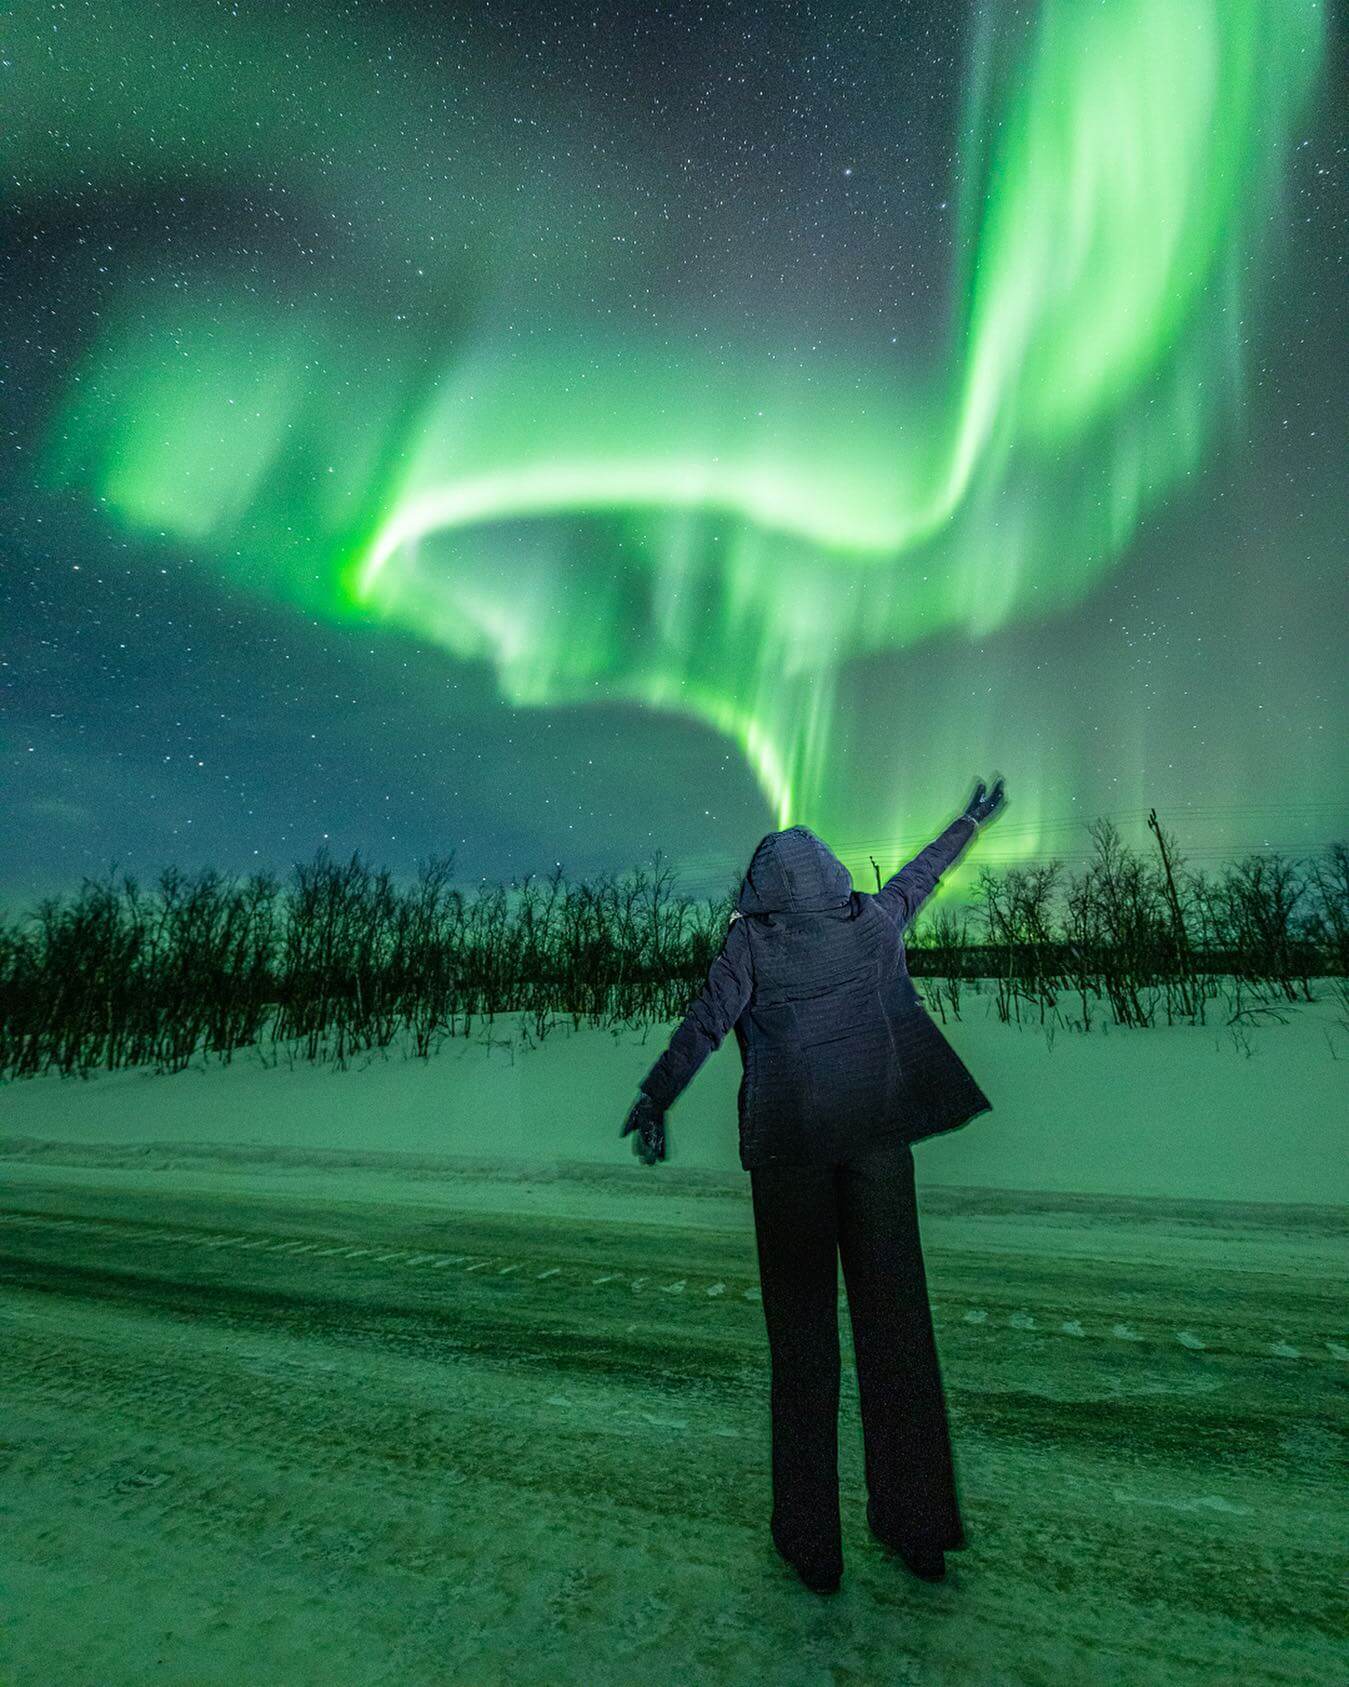 There is Solar storm warning for tomorrow. 😍
Means very likely there will be some awesome Northern Lights happening. 🤞🥳
Let us know if you want to join us. 🙌
•
•
•
•

#tromsø #northernnorway #visittromso #northnorway2day #northernlights #tromsolove #naturephotography #lovenature #aurora #worldaurora #norge #norgefoto #worldaurora #visitnorway #auroraborealis #ig_nordnorge #canon #mittnorge #norwayphotos #auroraborealblog #northernnorway #dreamchasersnorway #thebestofnorway #tromsomoment #ig_auroraborealis #natgeotravel #nortrip #solarstorm #kp